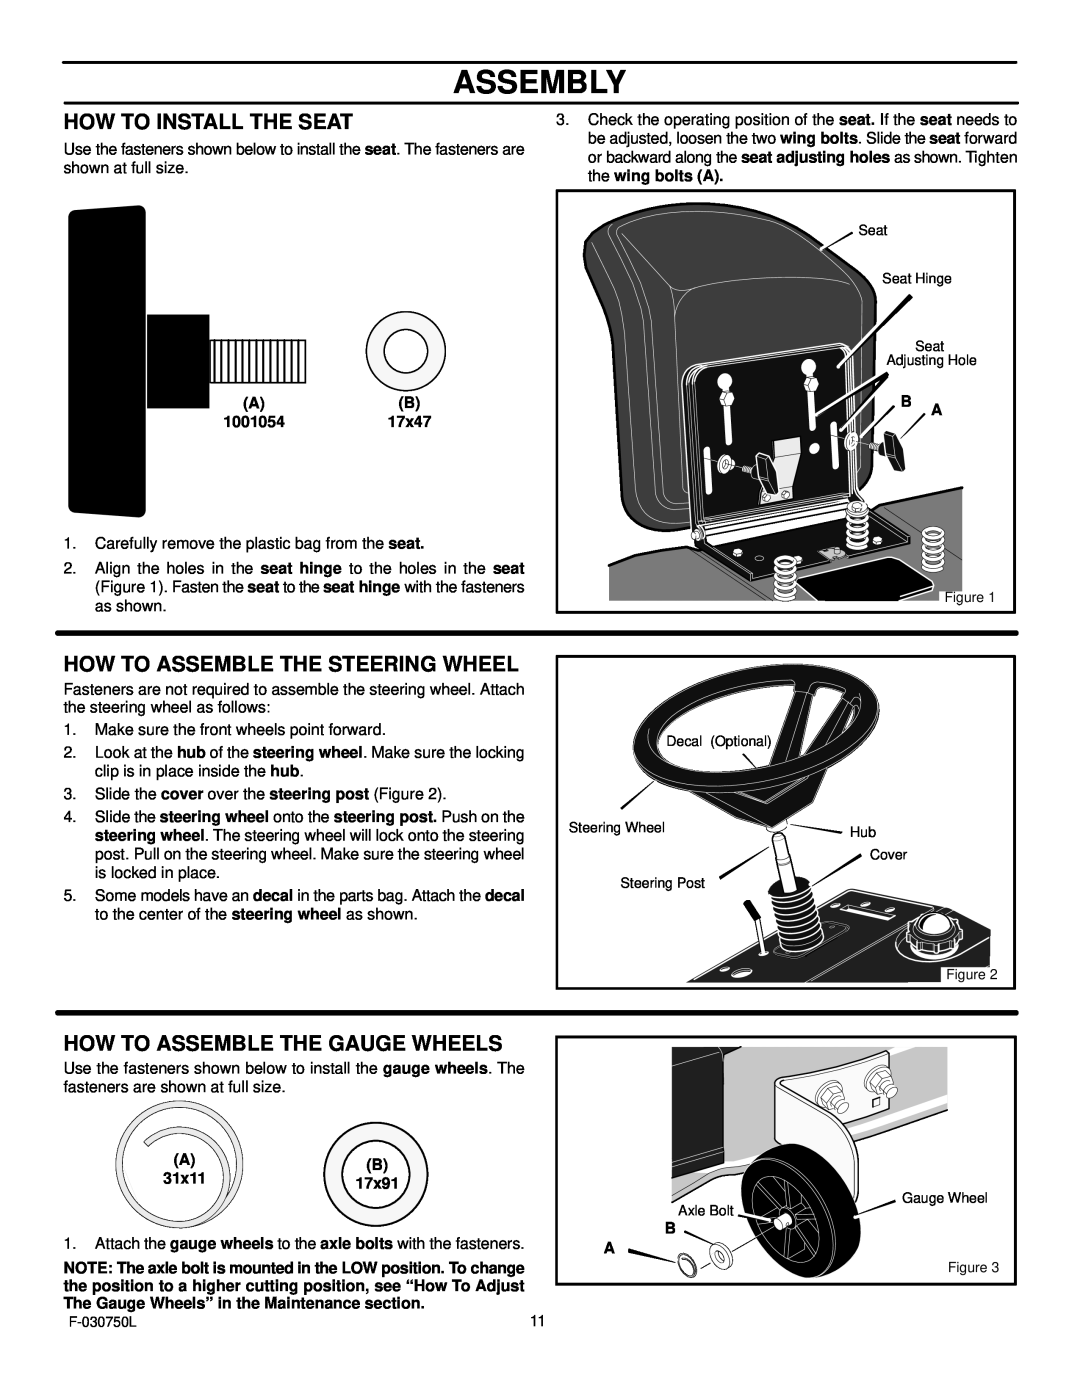 Murray 425306x48A Assembly, How To Install The Seat, How To Assemble The Steering Wheel, How To Assemble The Gauge Wheels 